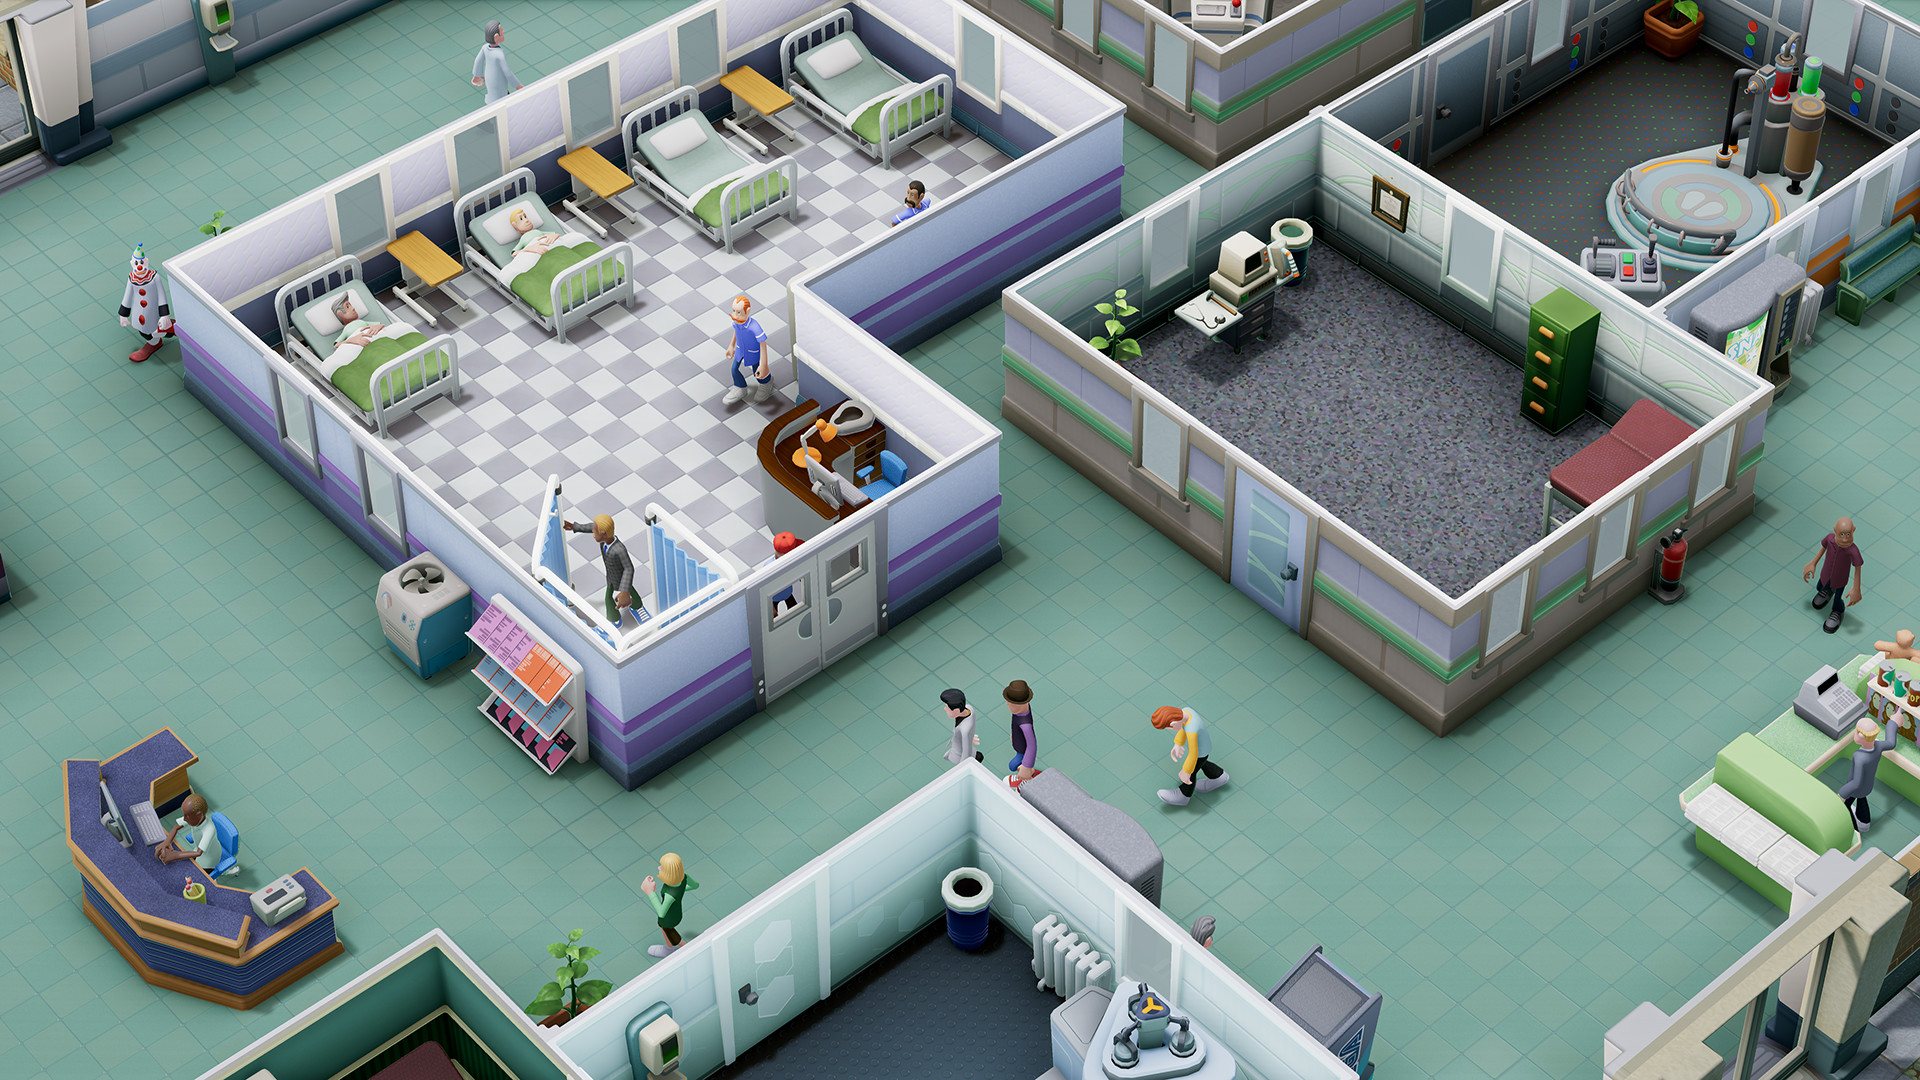 Two Point Hospital RU VPN Activated Steam CD Key